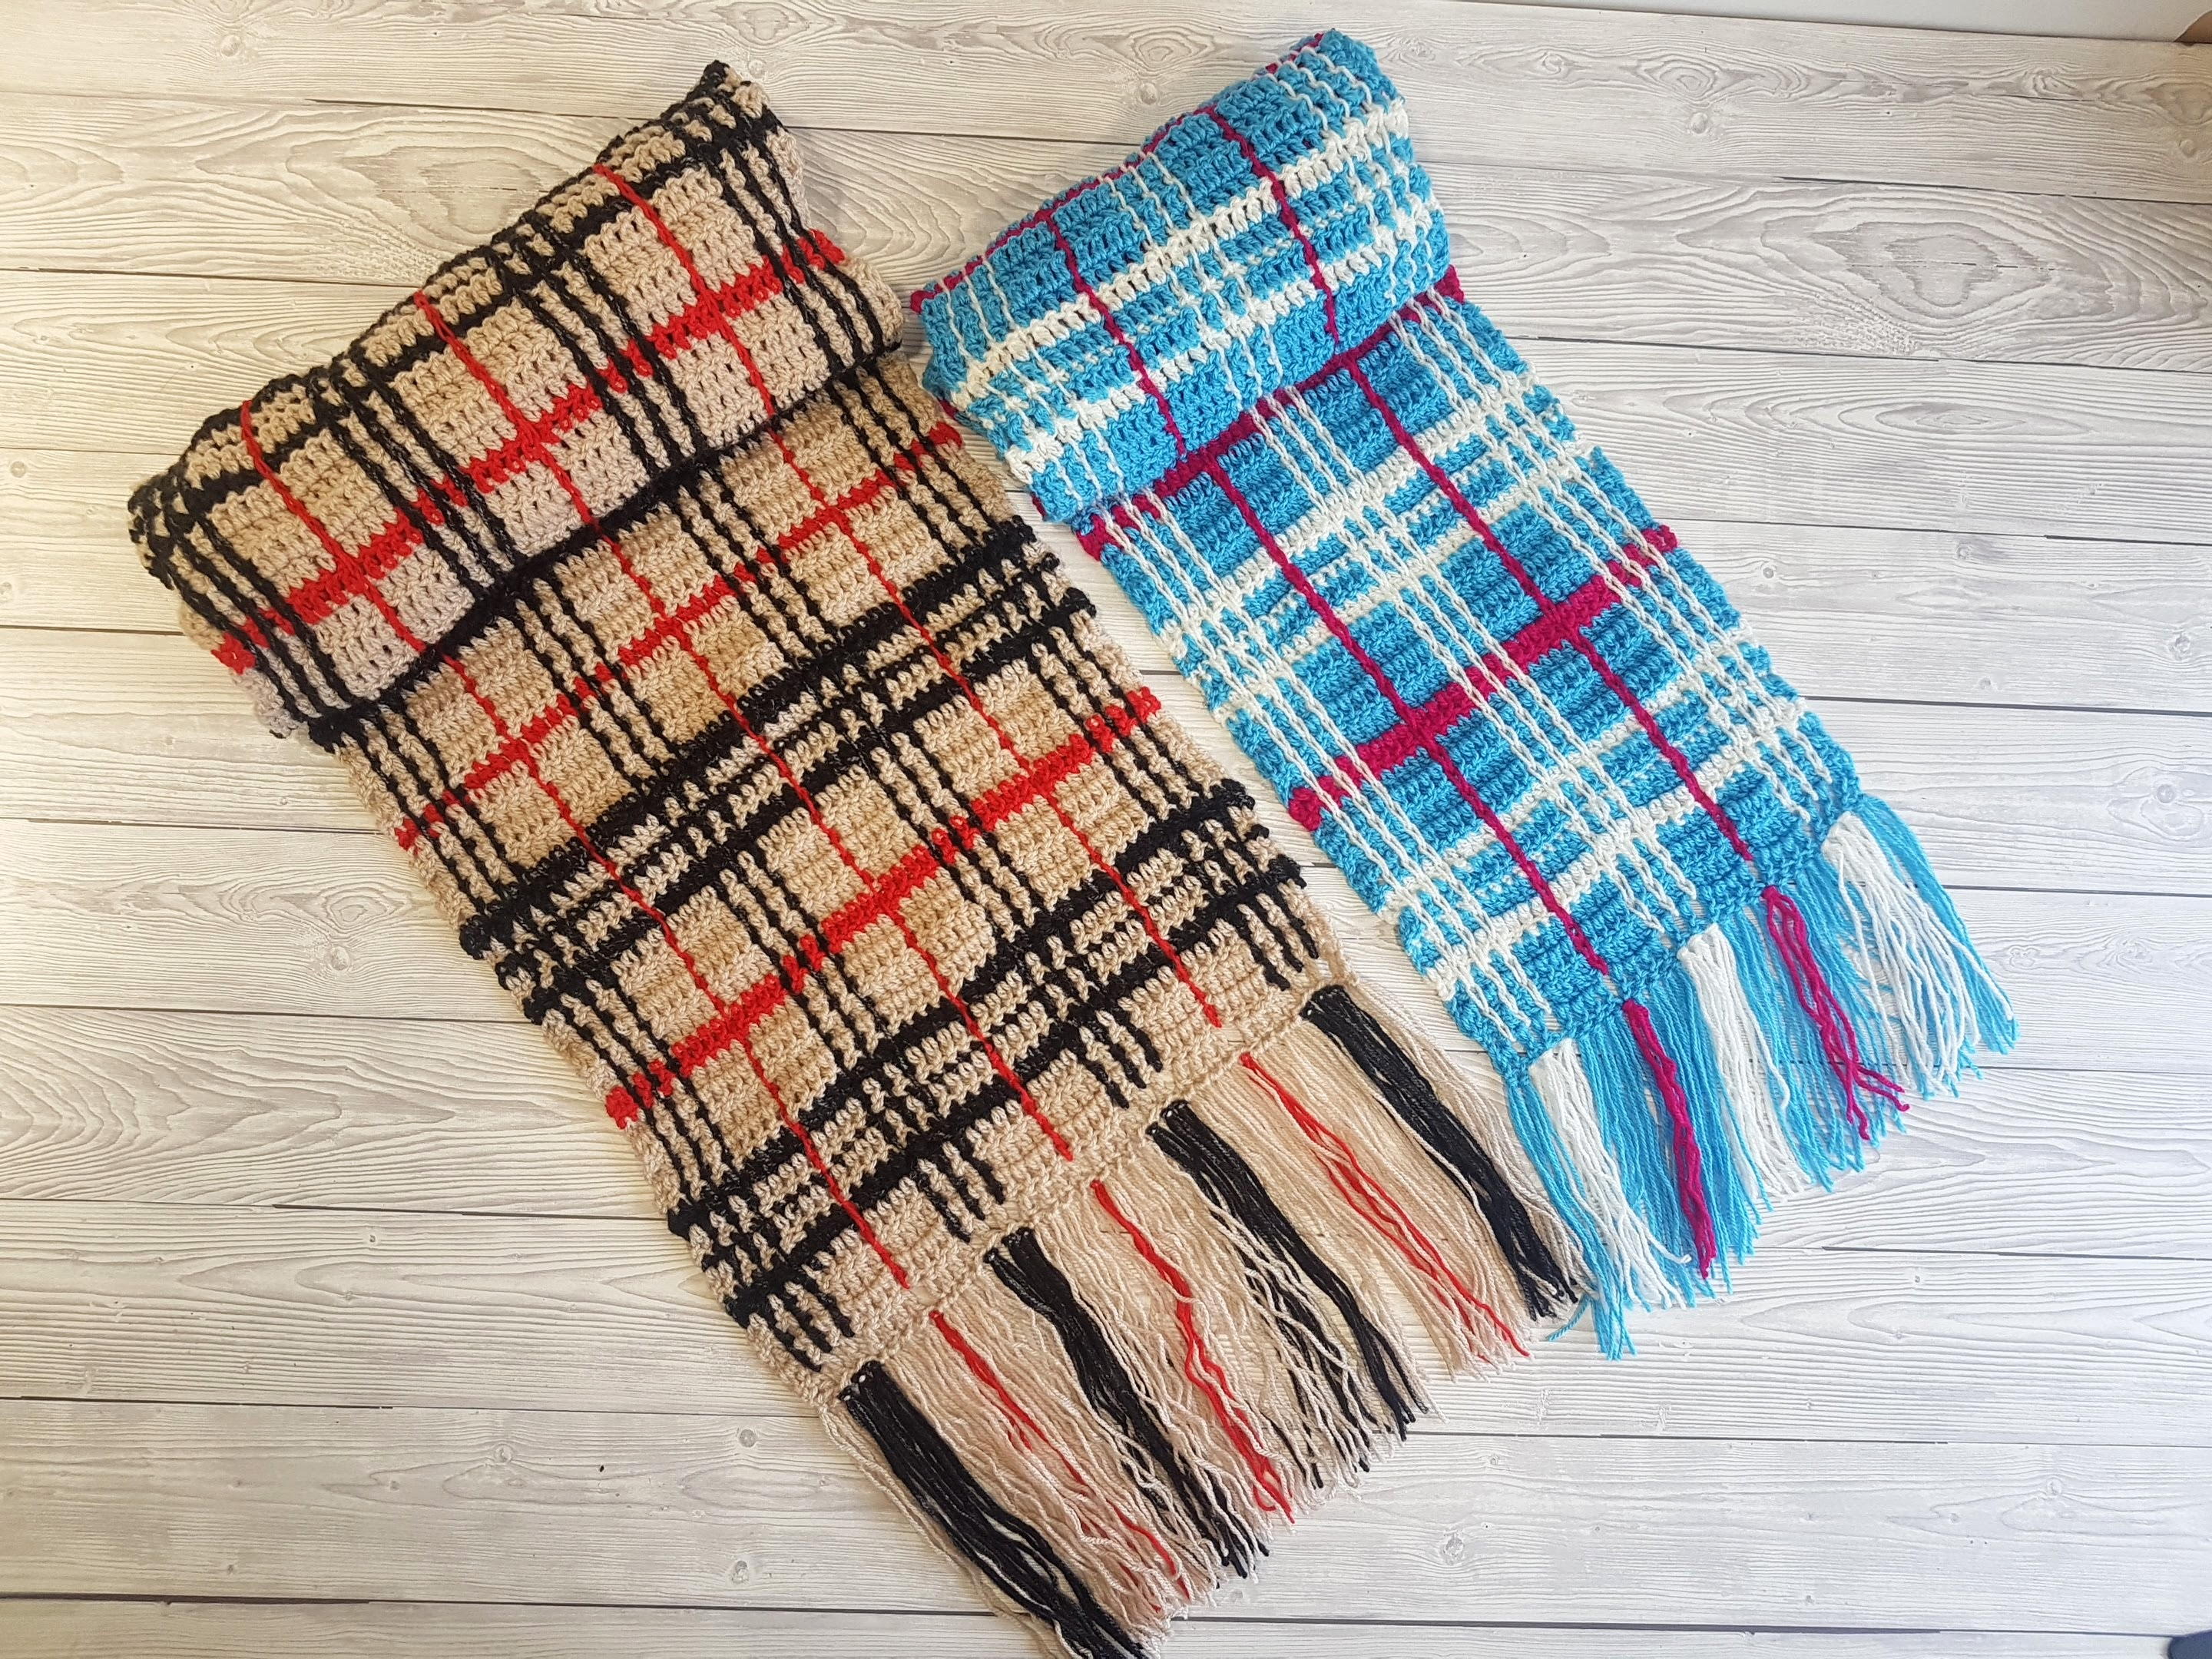 Crochet Plaid Scarf For Beginners - A Free Pattern and Video Tutorial